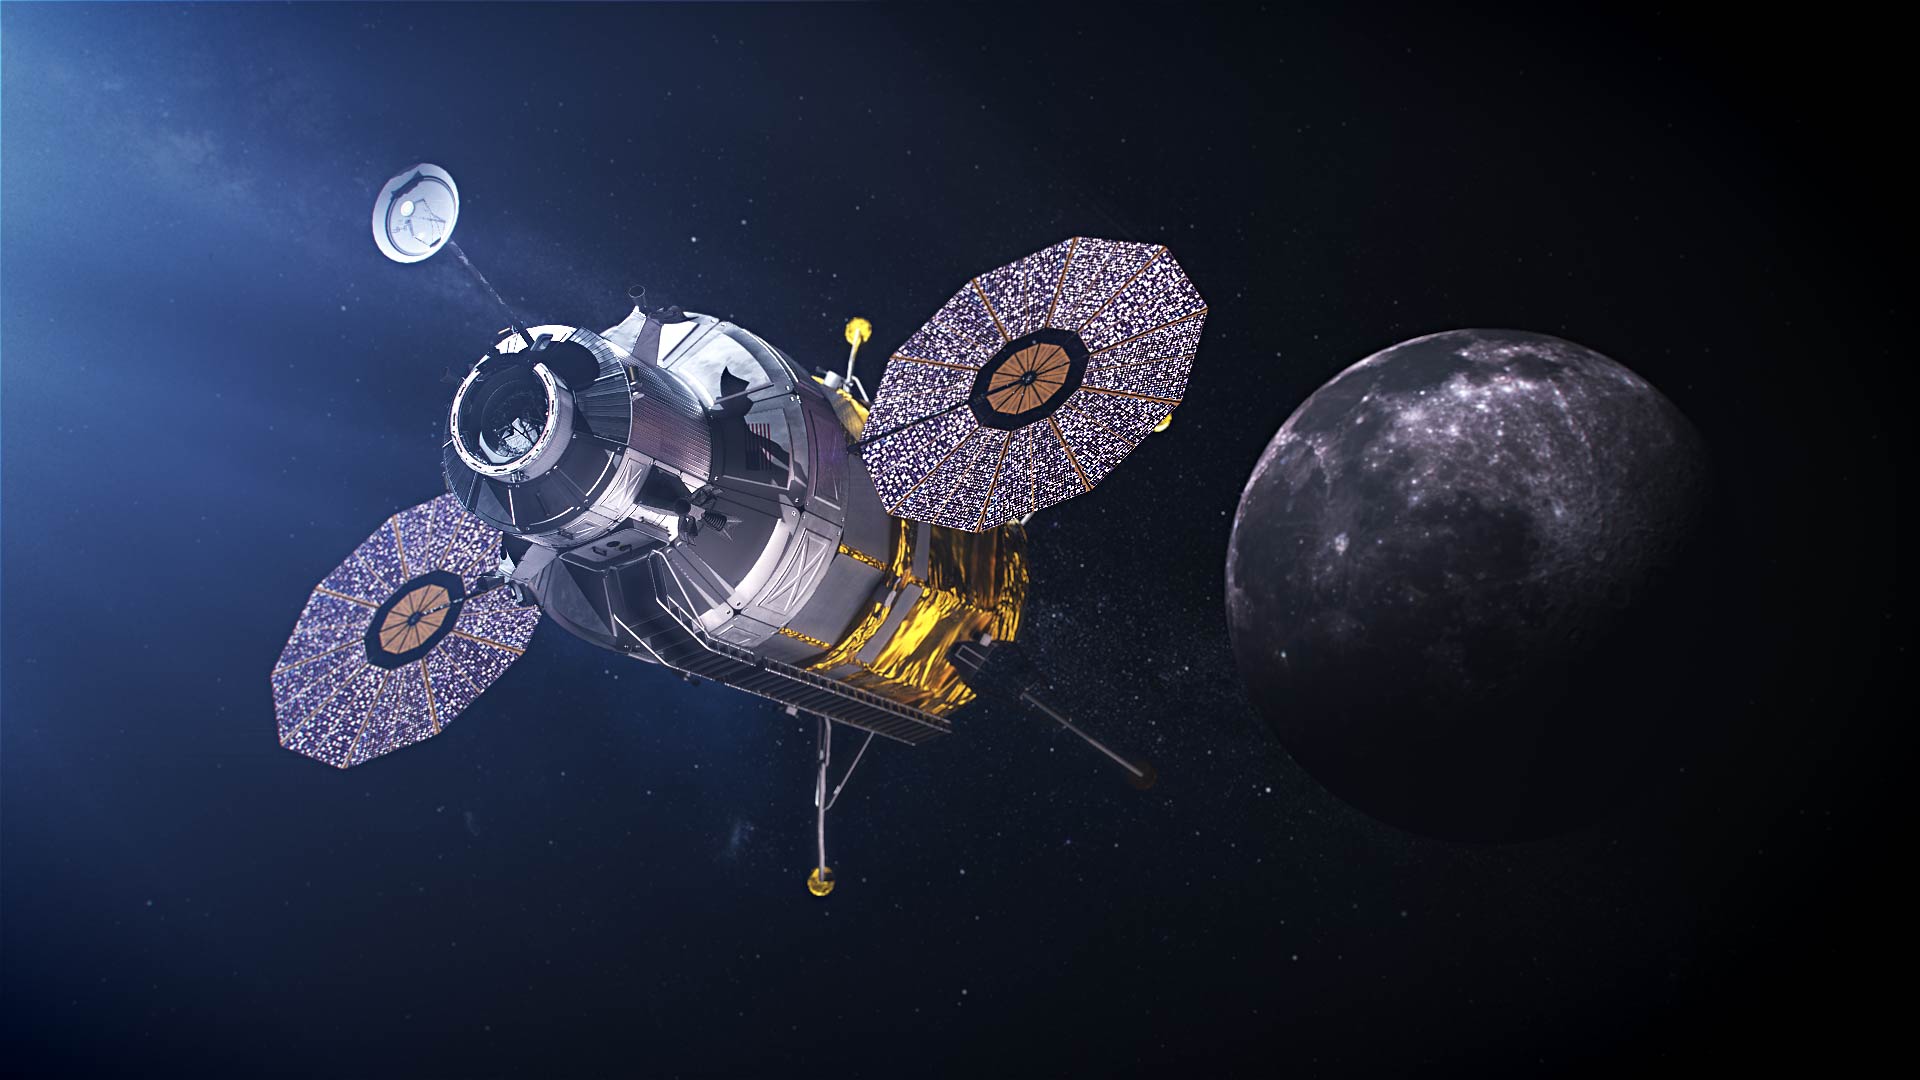 NASA Is Now Accepting Proposals for Artemis Landers to Fly Astronauts to the Moon